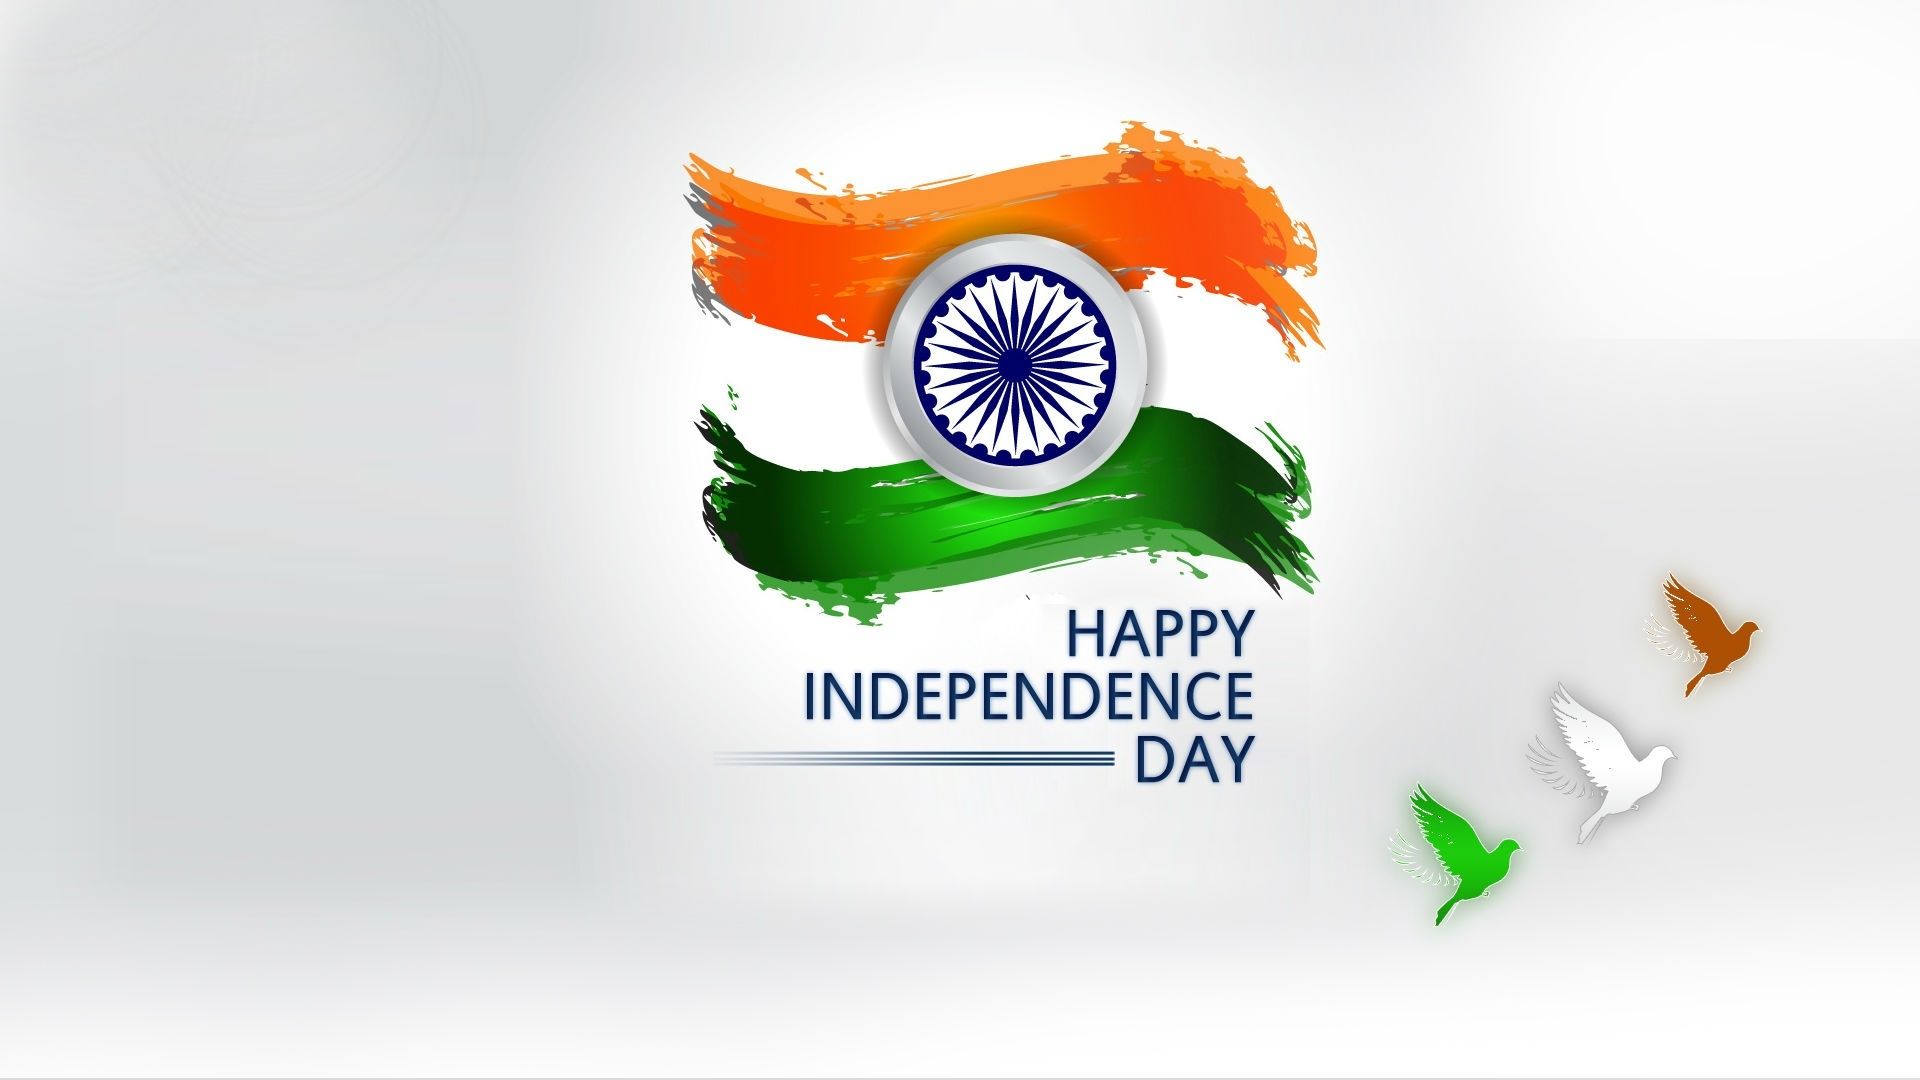 Happy Independence Day 2020 Image